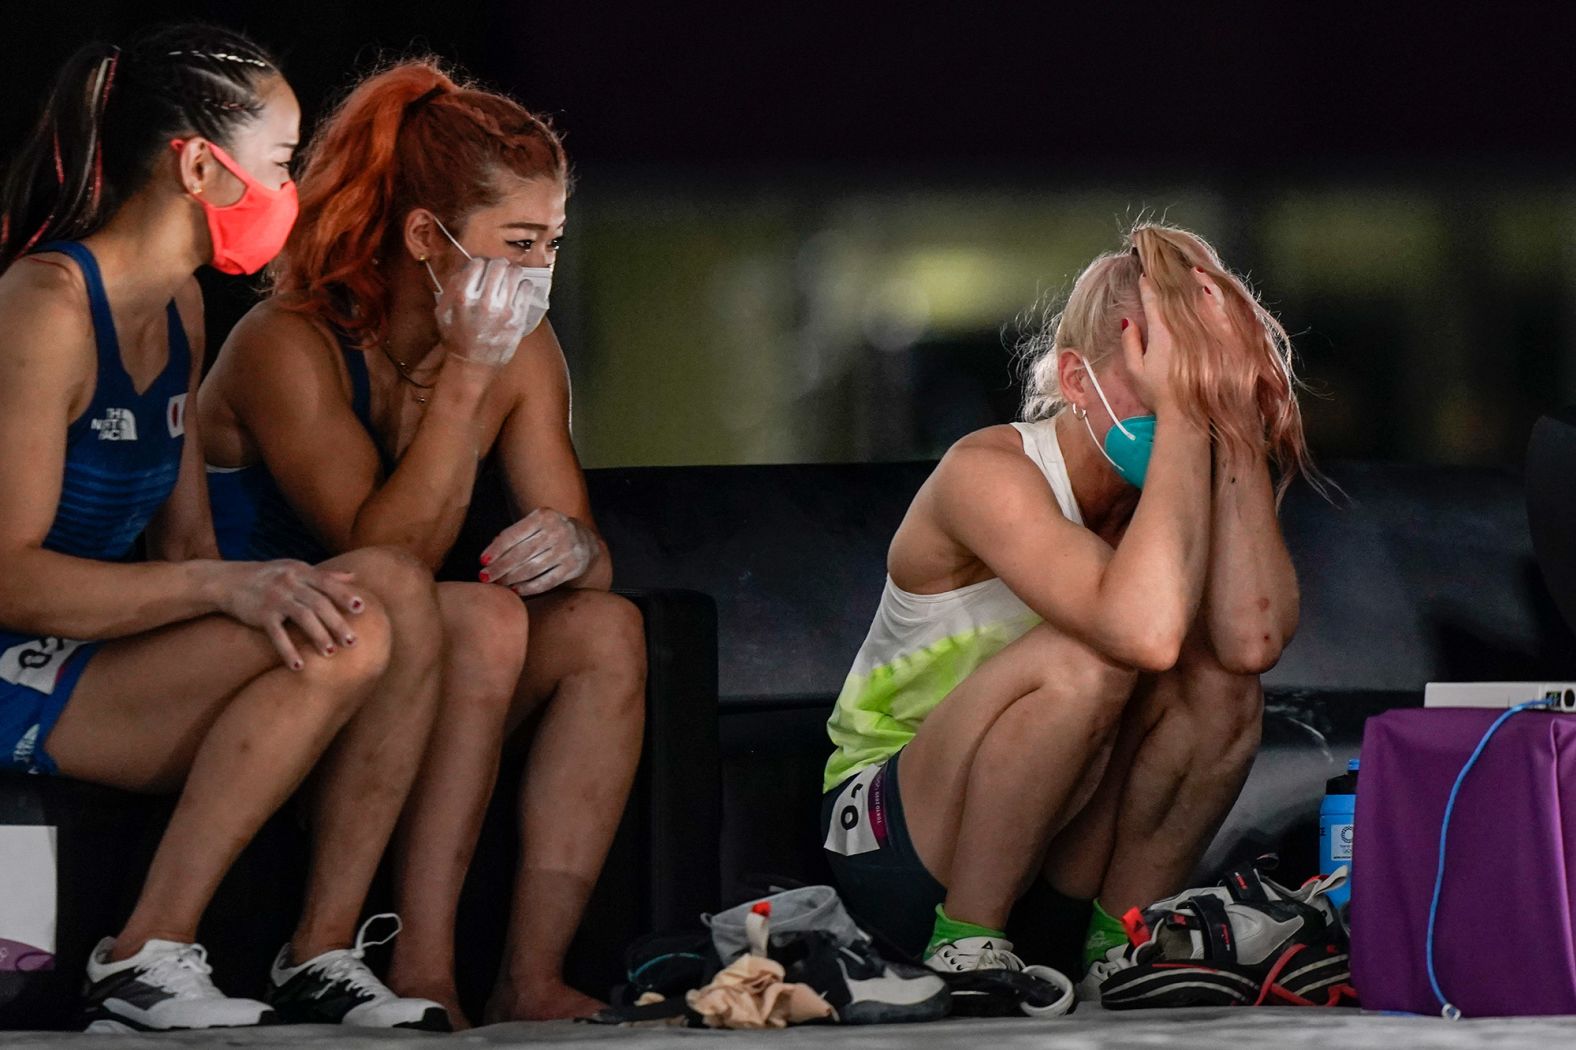 Slovenia's Janja Garnbret reacts after becoming <a href="index.php?page=&url=https%3A%2F%2Fwww.cnn.com%2F2021%2F08%2F06%2Fsport%2Fjanja-garnbret-sports-climbing-tokyo-olympics-spt-intl%2Findex.html" target="_blank">the first woman to win an Olympic gold medal in sport climbing </a>on August 6. At left are bronze medalist Akiyo Noguchi and silver medalist Miho Nonaka, both of Japan.